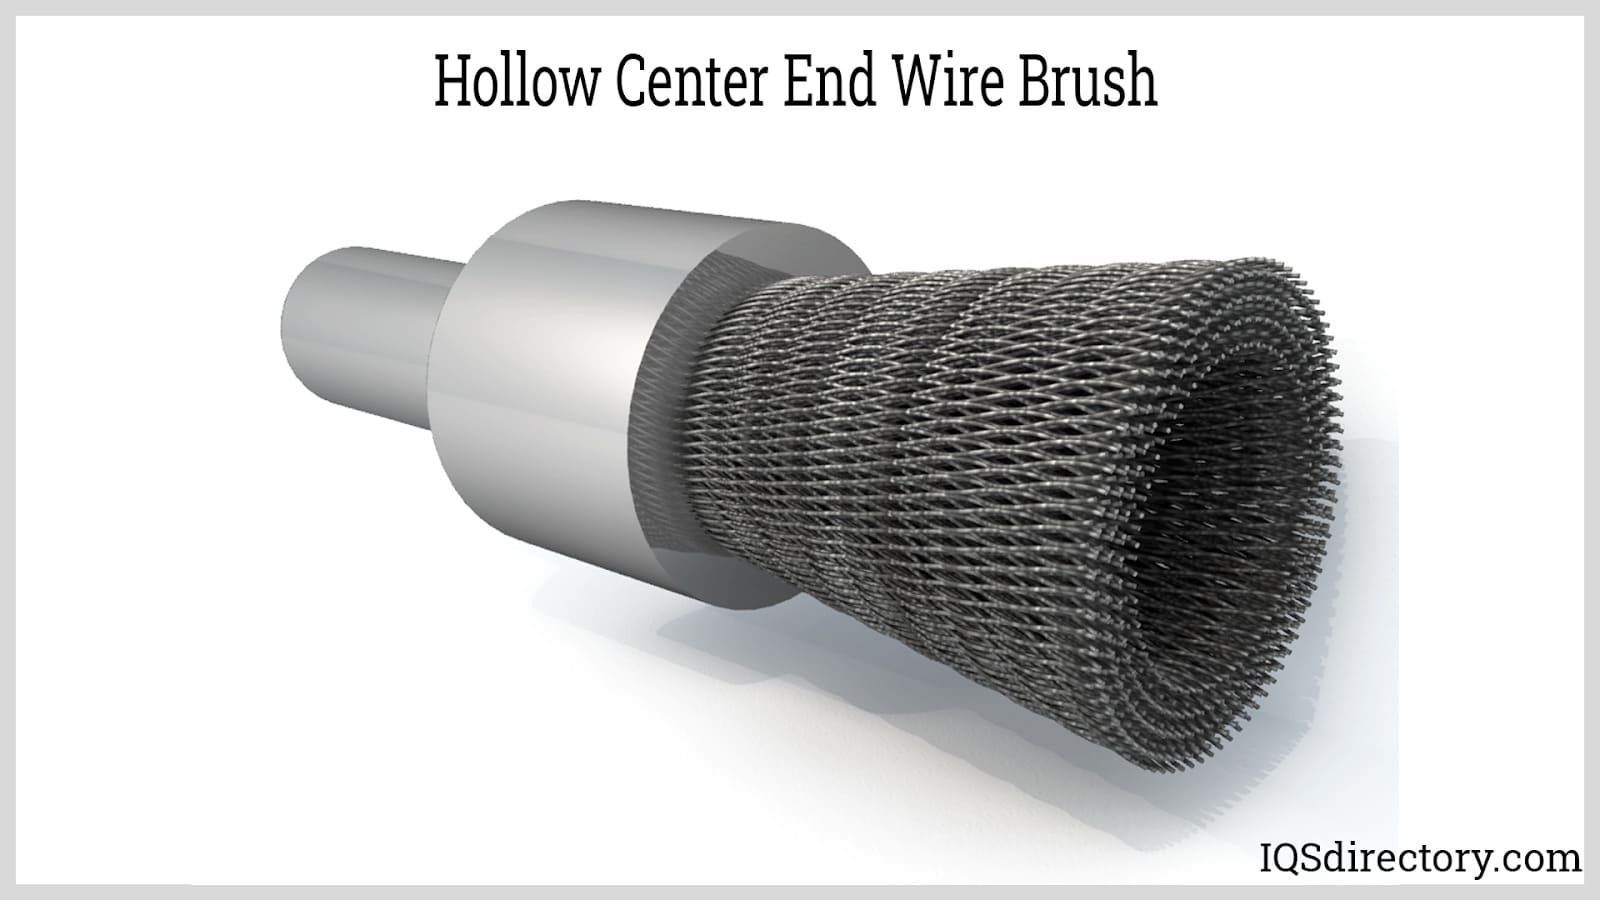 Hollow Center End Wire Brush